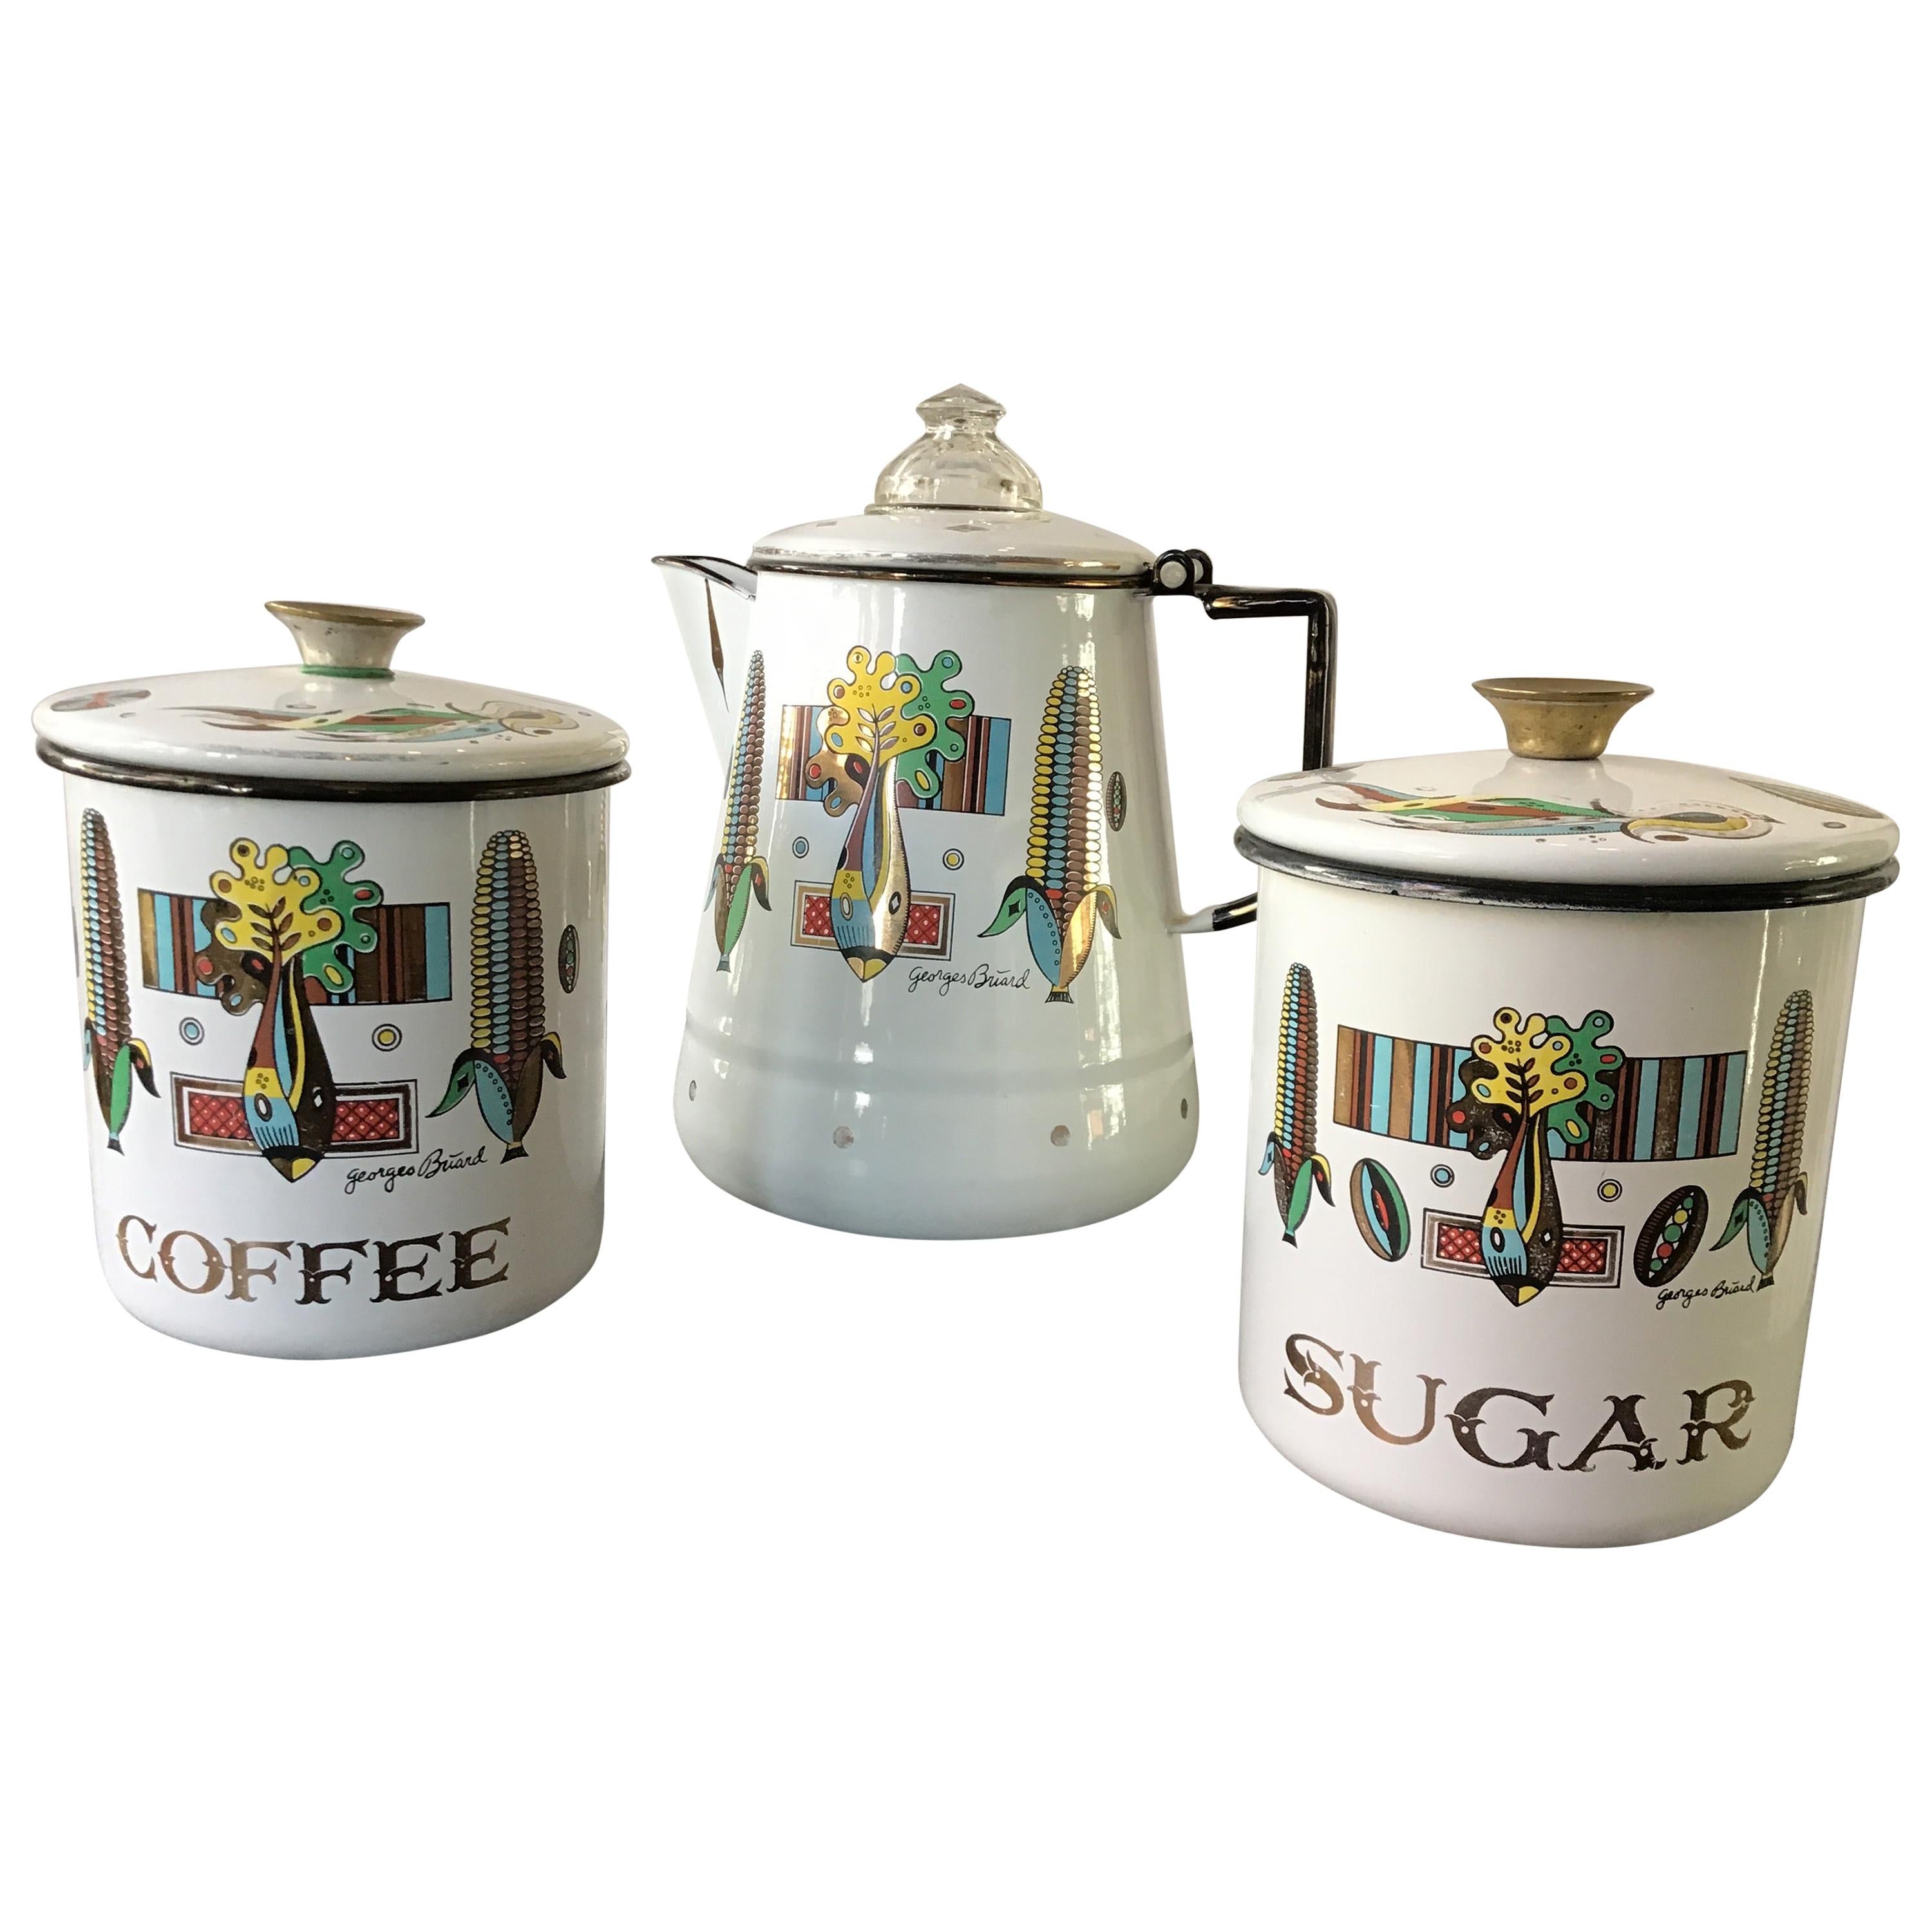 Georges Briard 3-Piece Enamelware Coffee Set For Sale